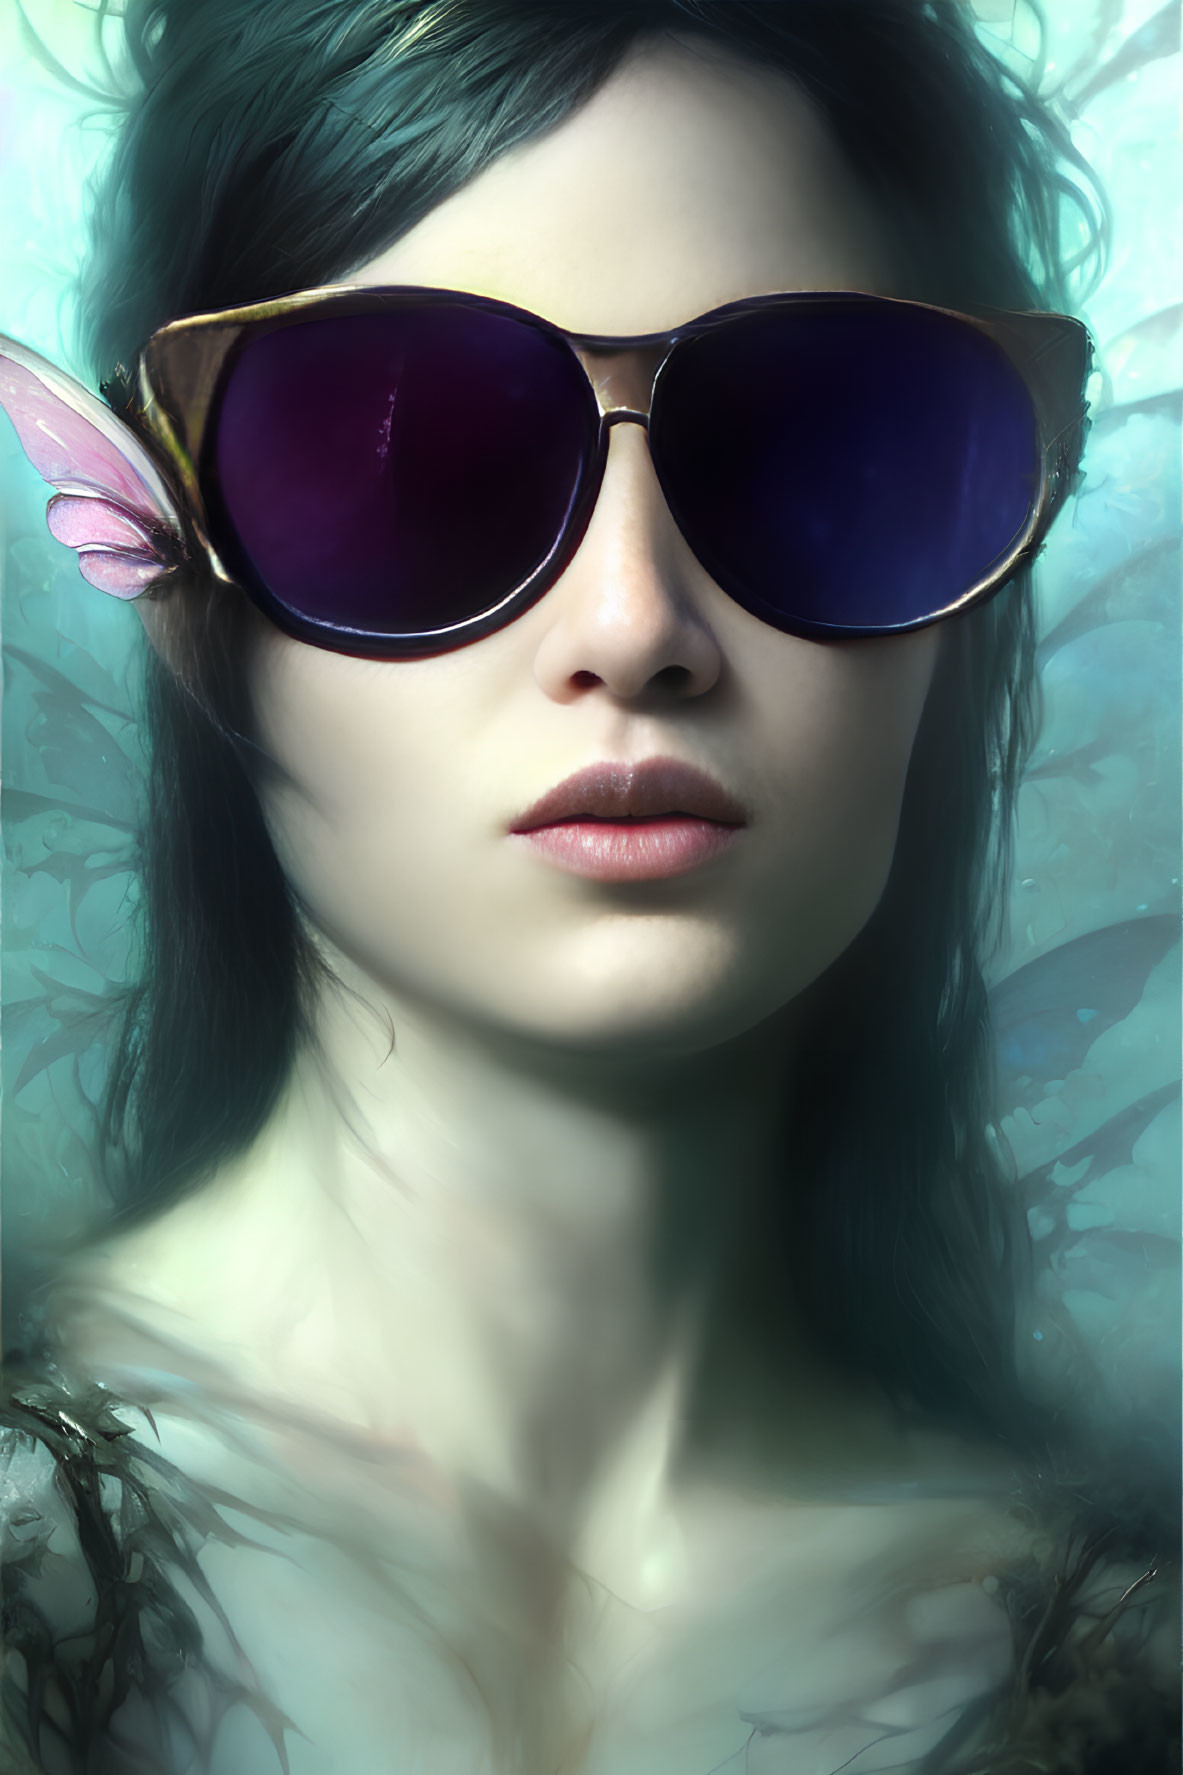 Woman in large purple butterfly sunglasses under ethereal blue lighting